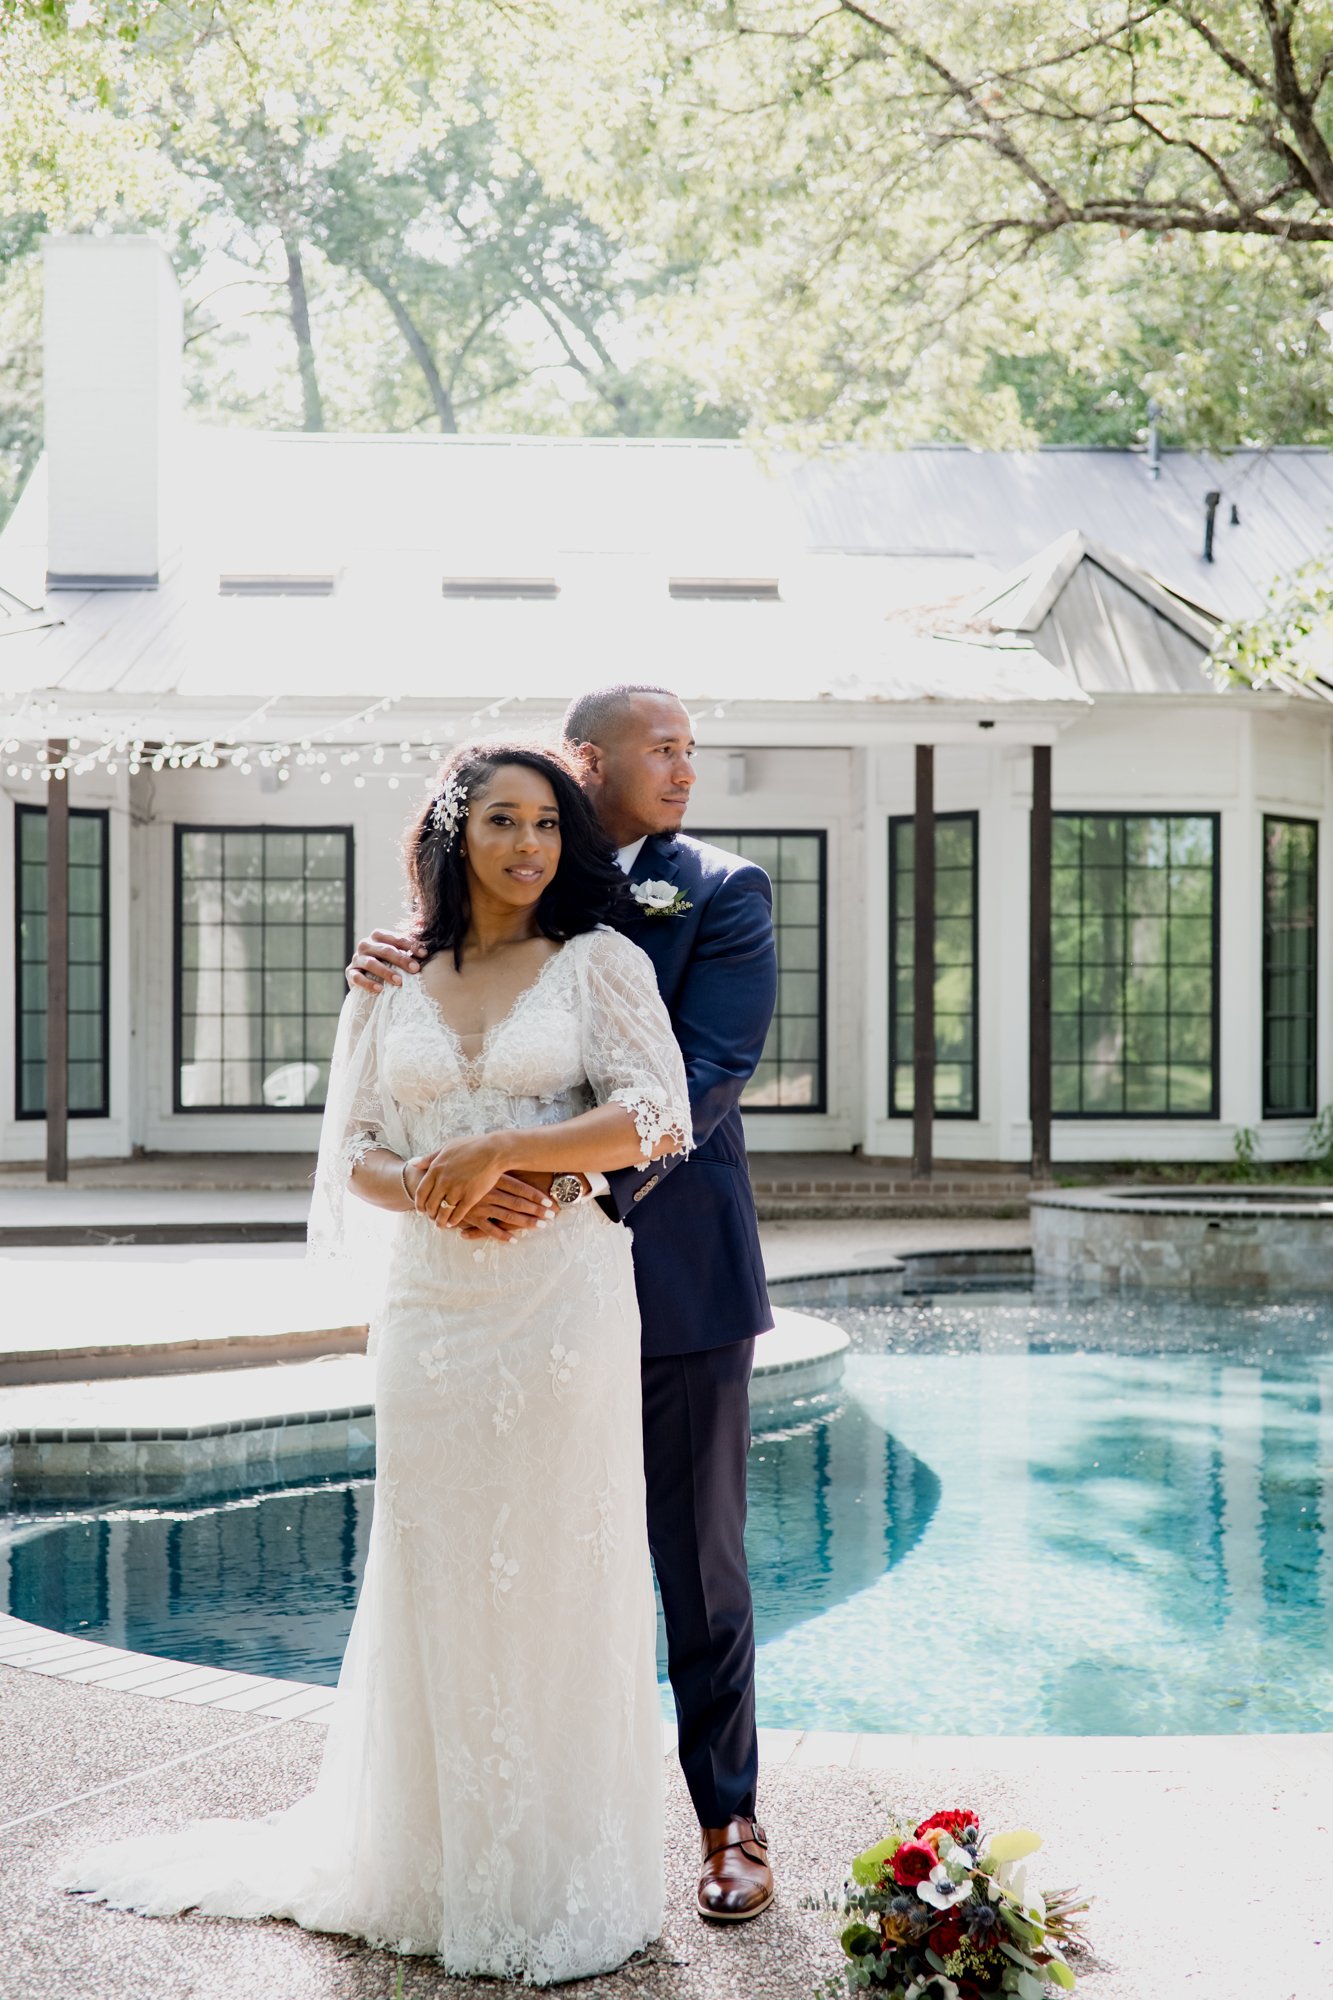 Bride and groom posing by the pool. Wedding at The Oak Atelier